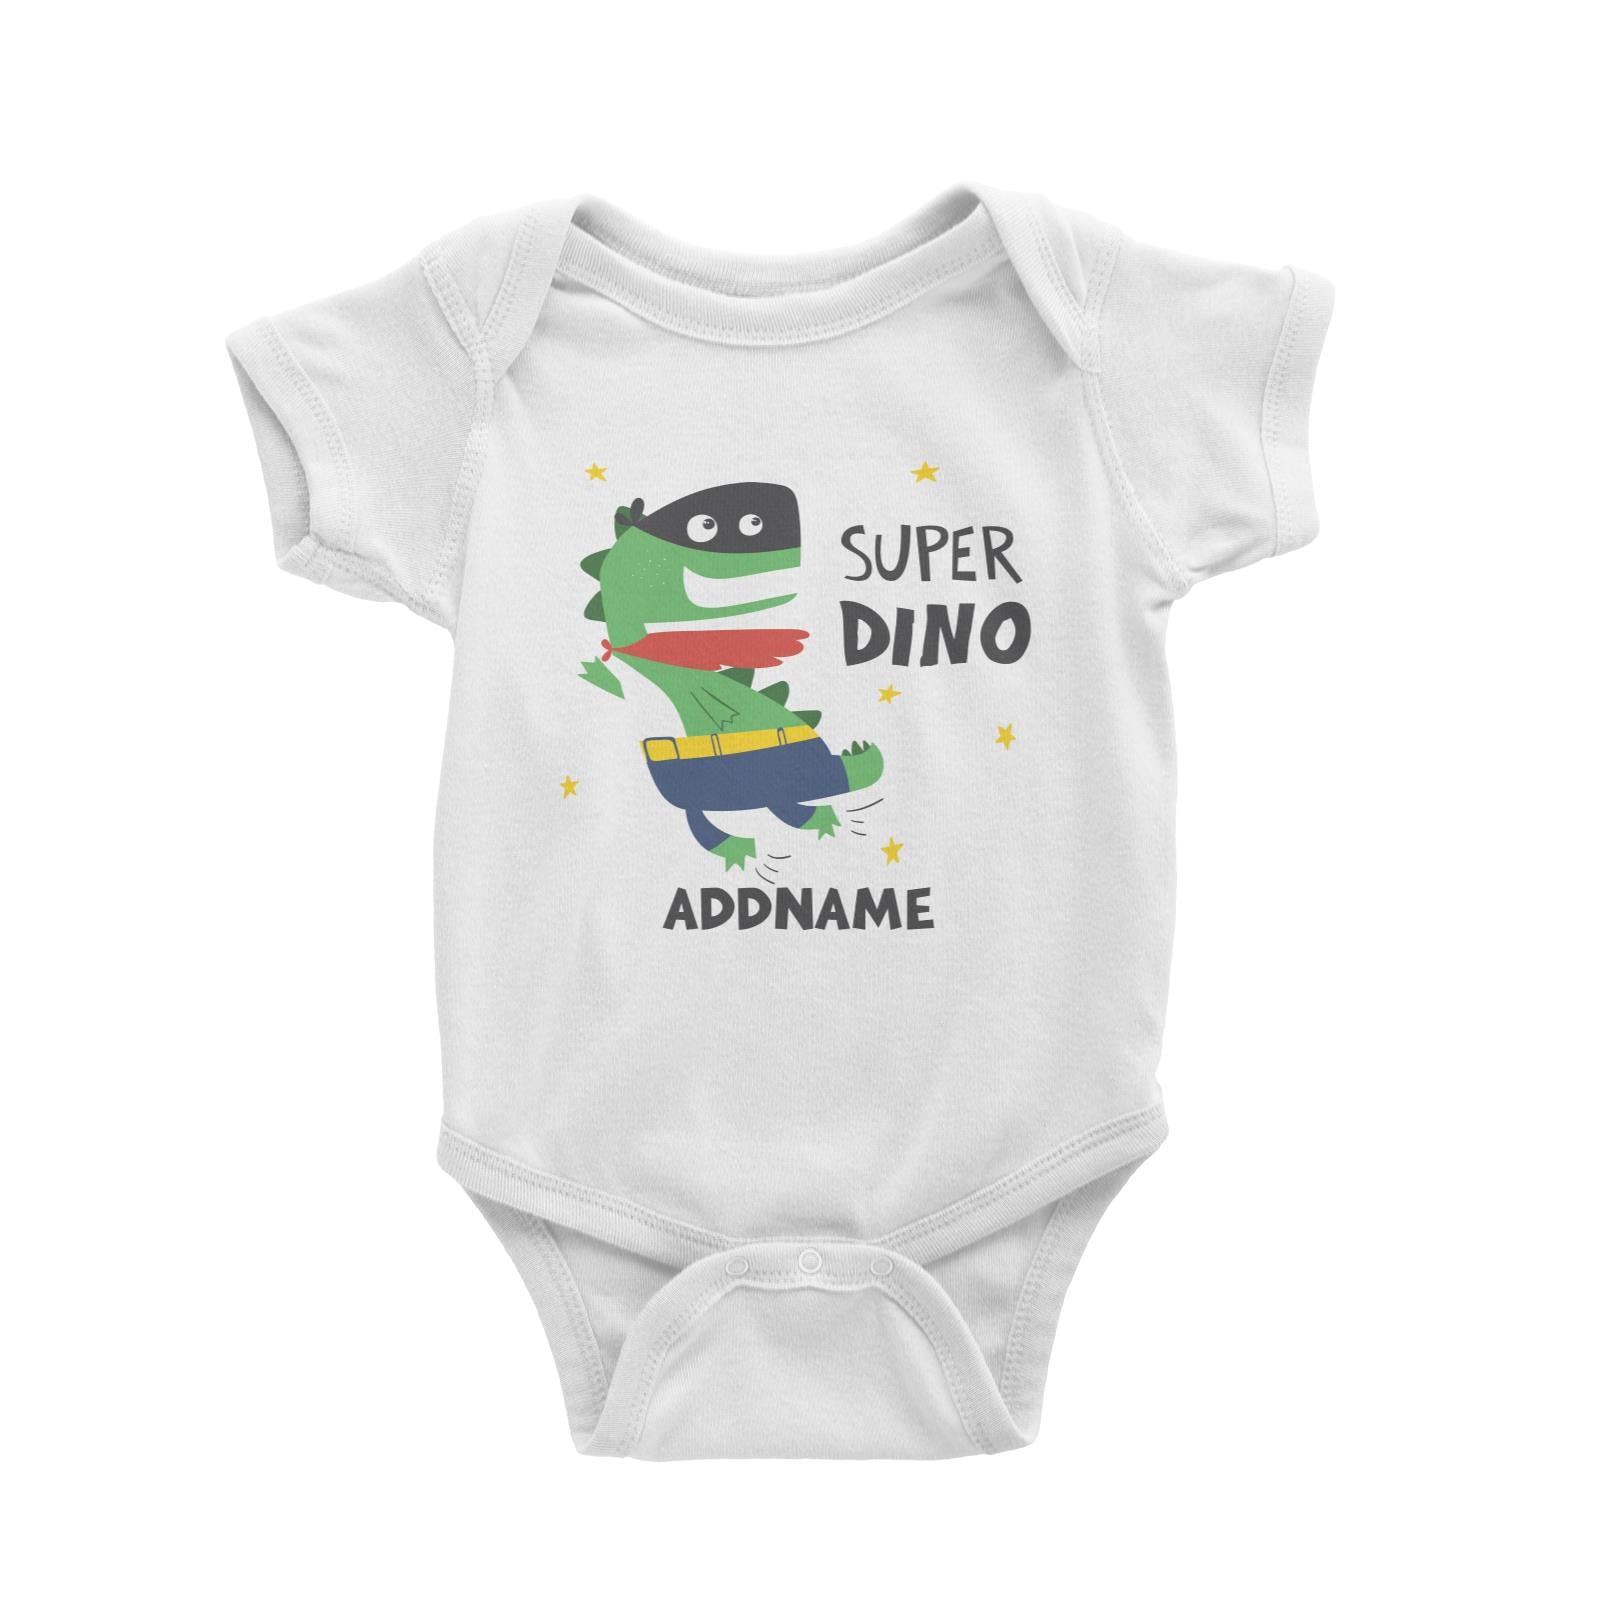 Super Dinosaur with Mask and Cape Addname White Baby Romper